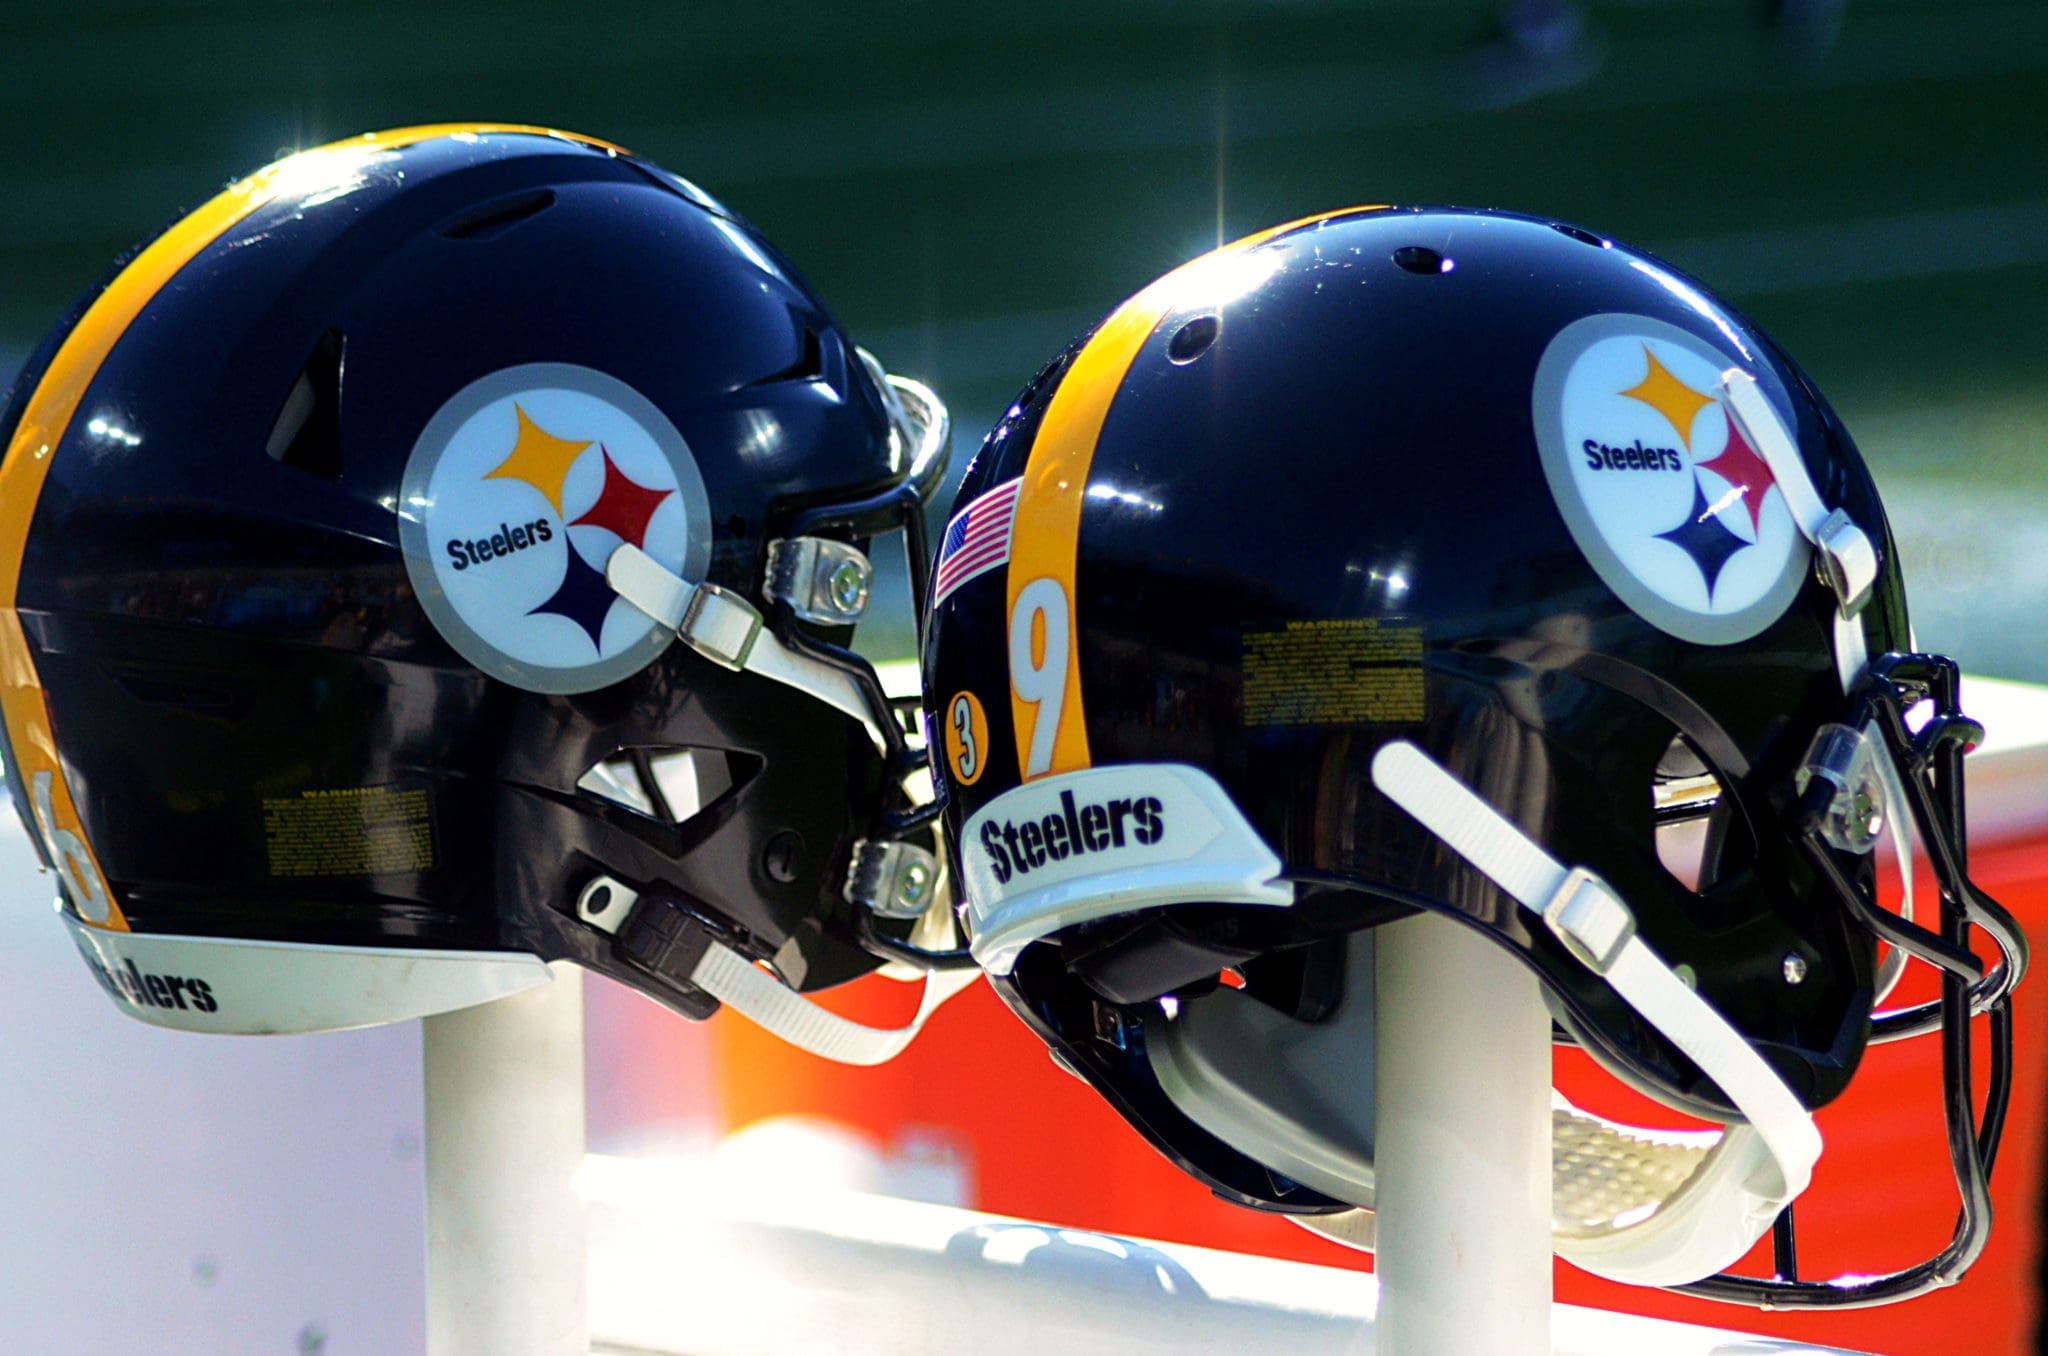 Two Steelers helmets at Charlotte's Bank of America Stadium on Dec. 18, 2022. (Mitchell Northam / Steelers Now)